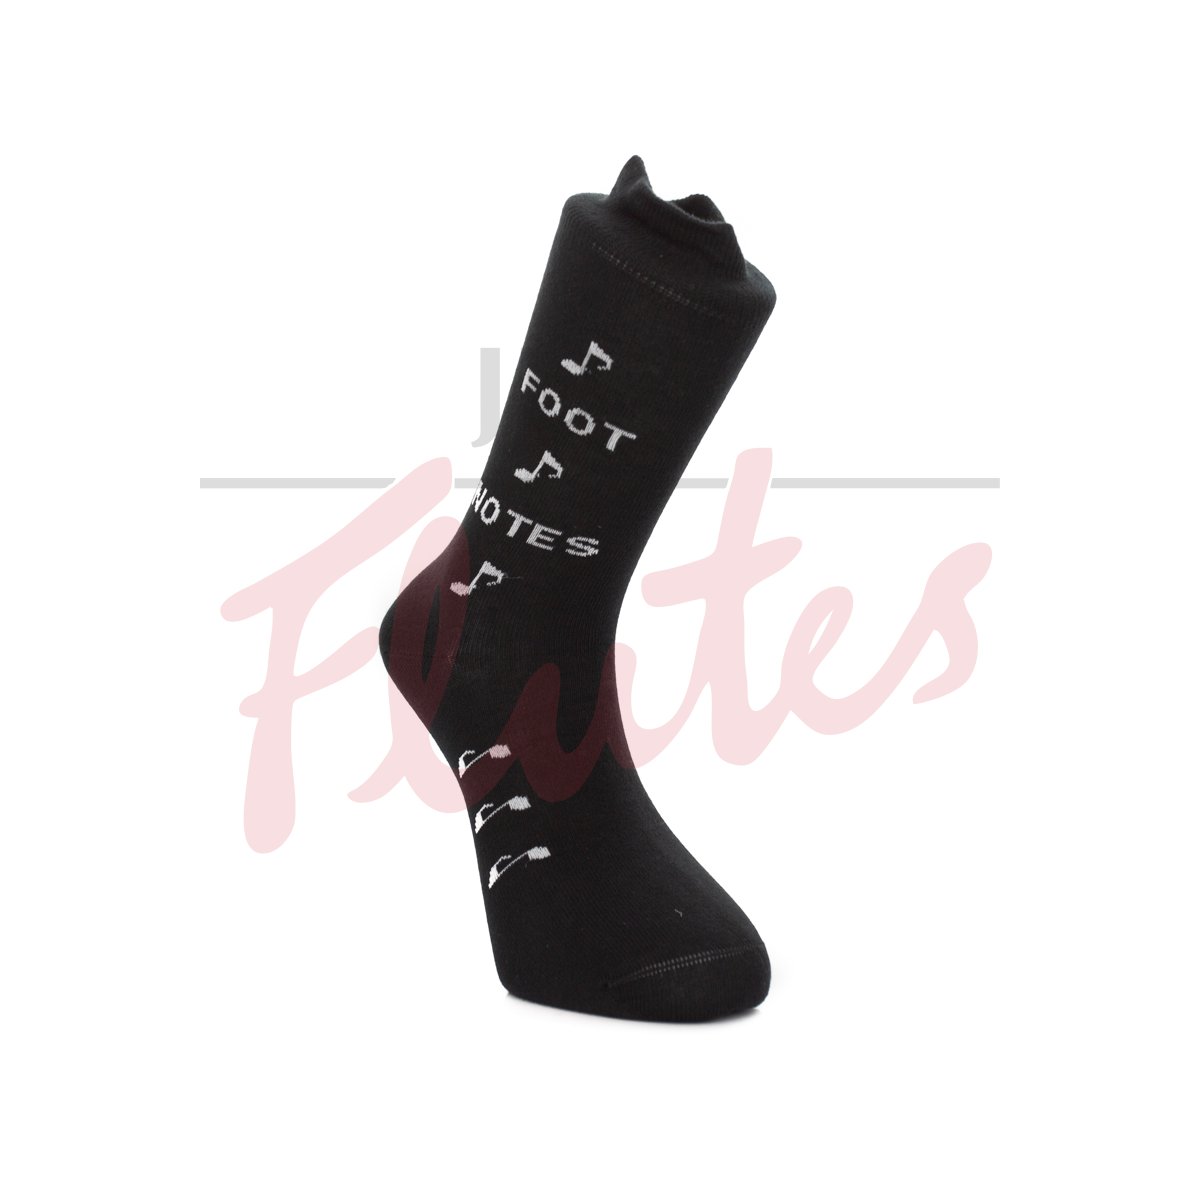 Music Socks - Foot Notes (Size 6-11)